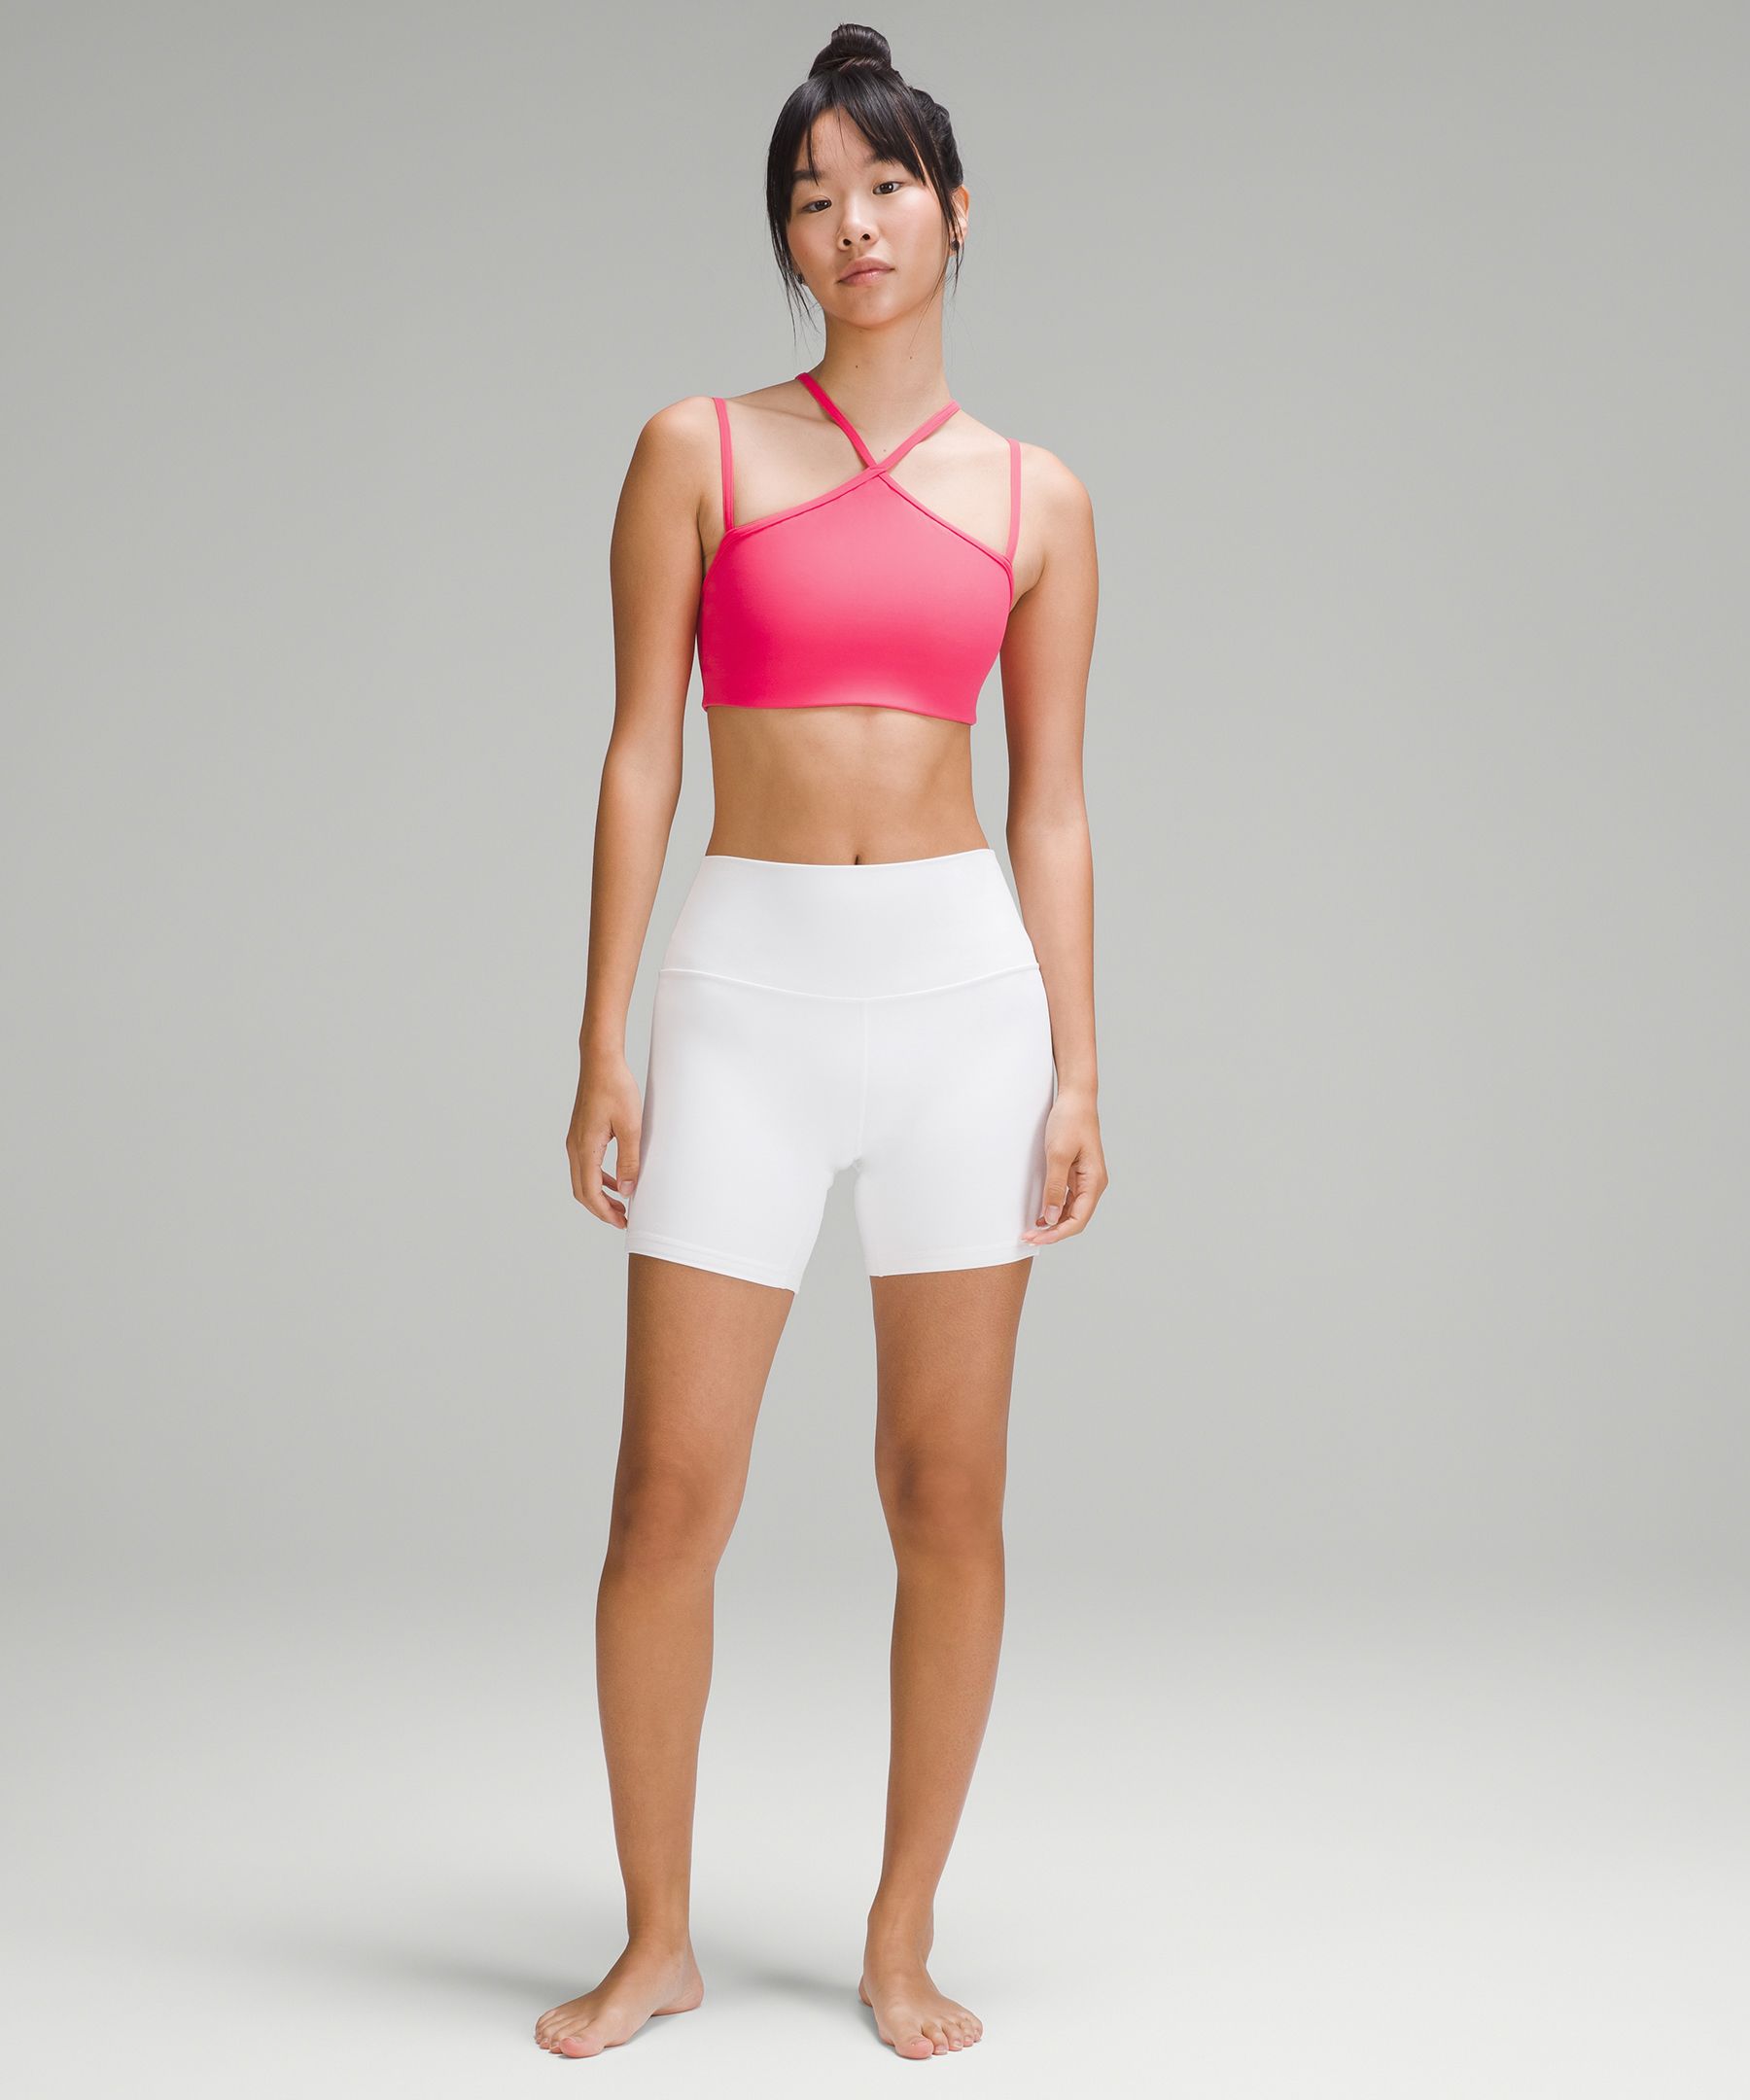 Lululemon Introduces Lightweight Bra for Day and Night